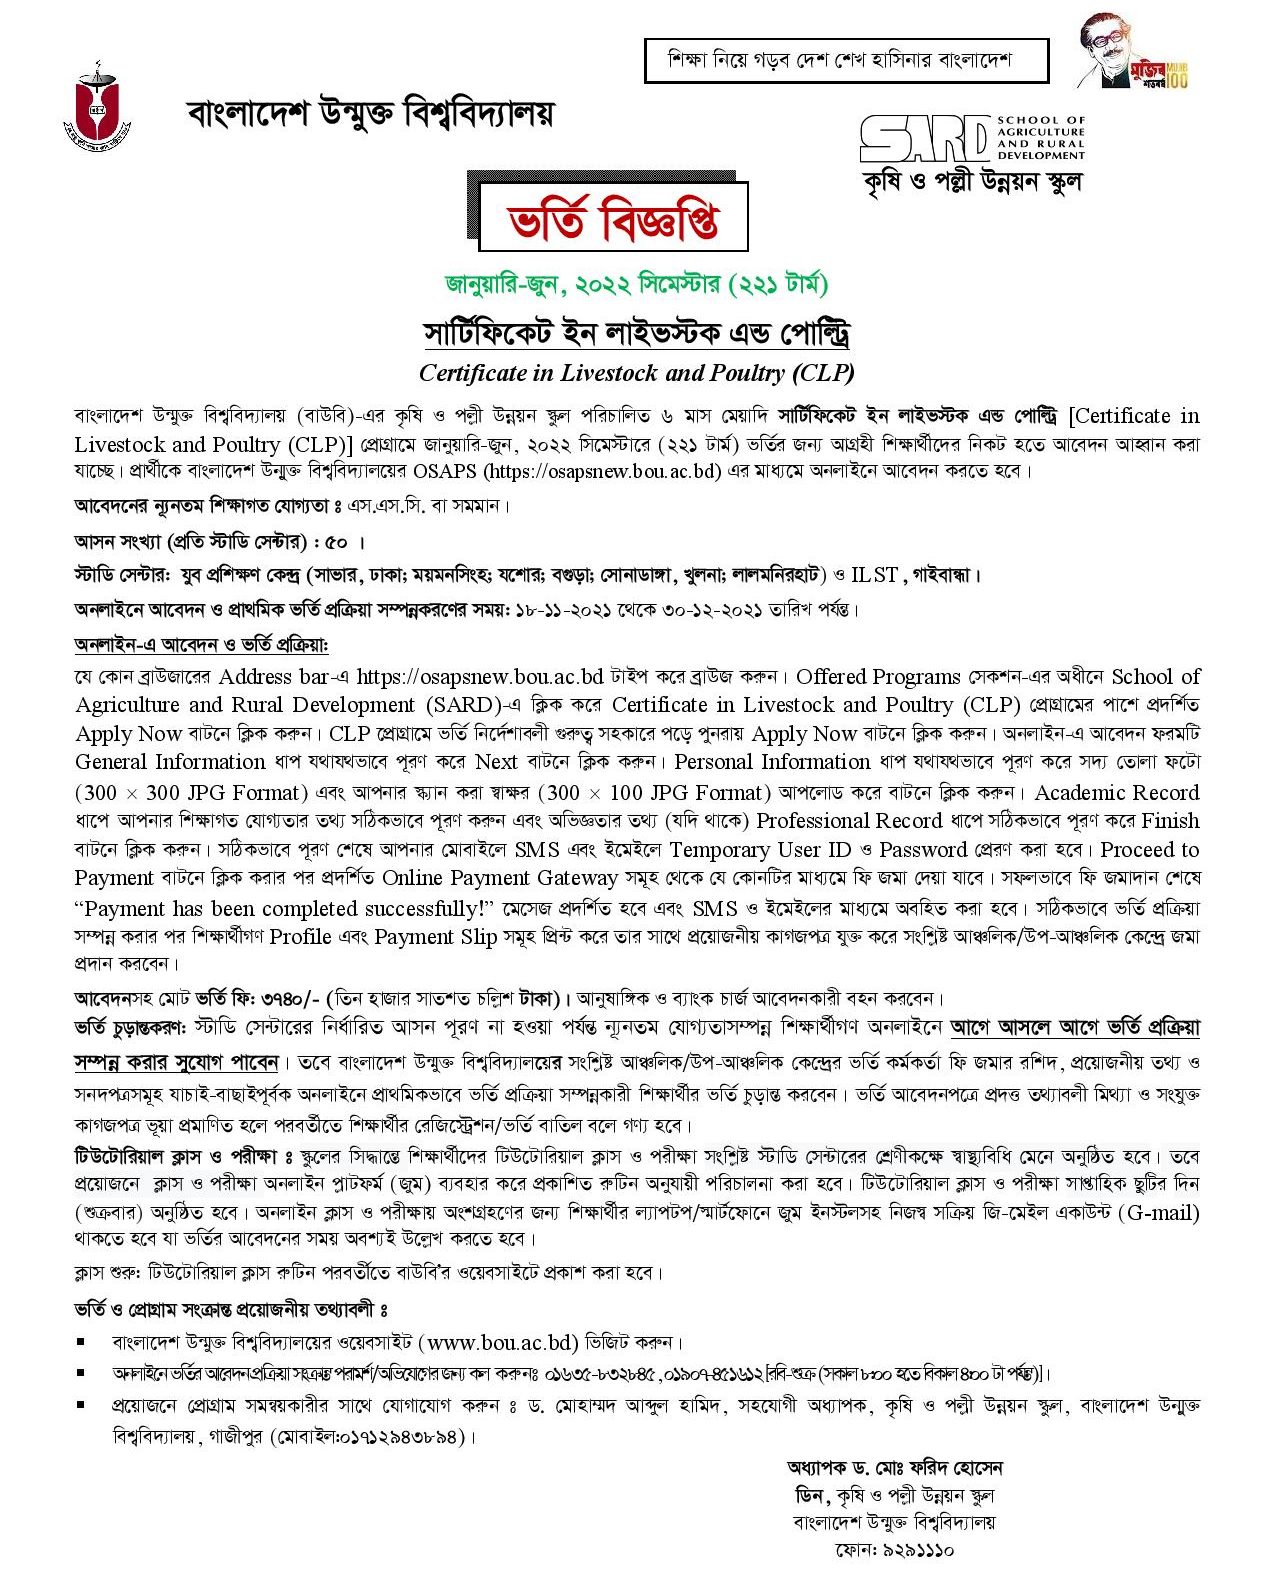 BOU Certificate in Livestock and Poultry (CLP) Admission Circular 2021